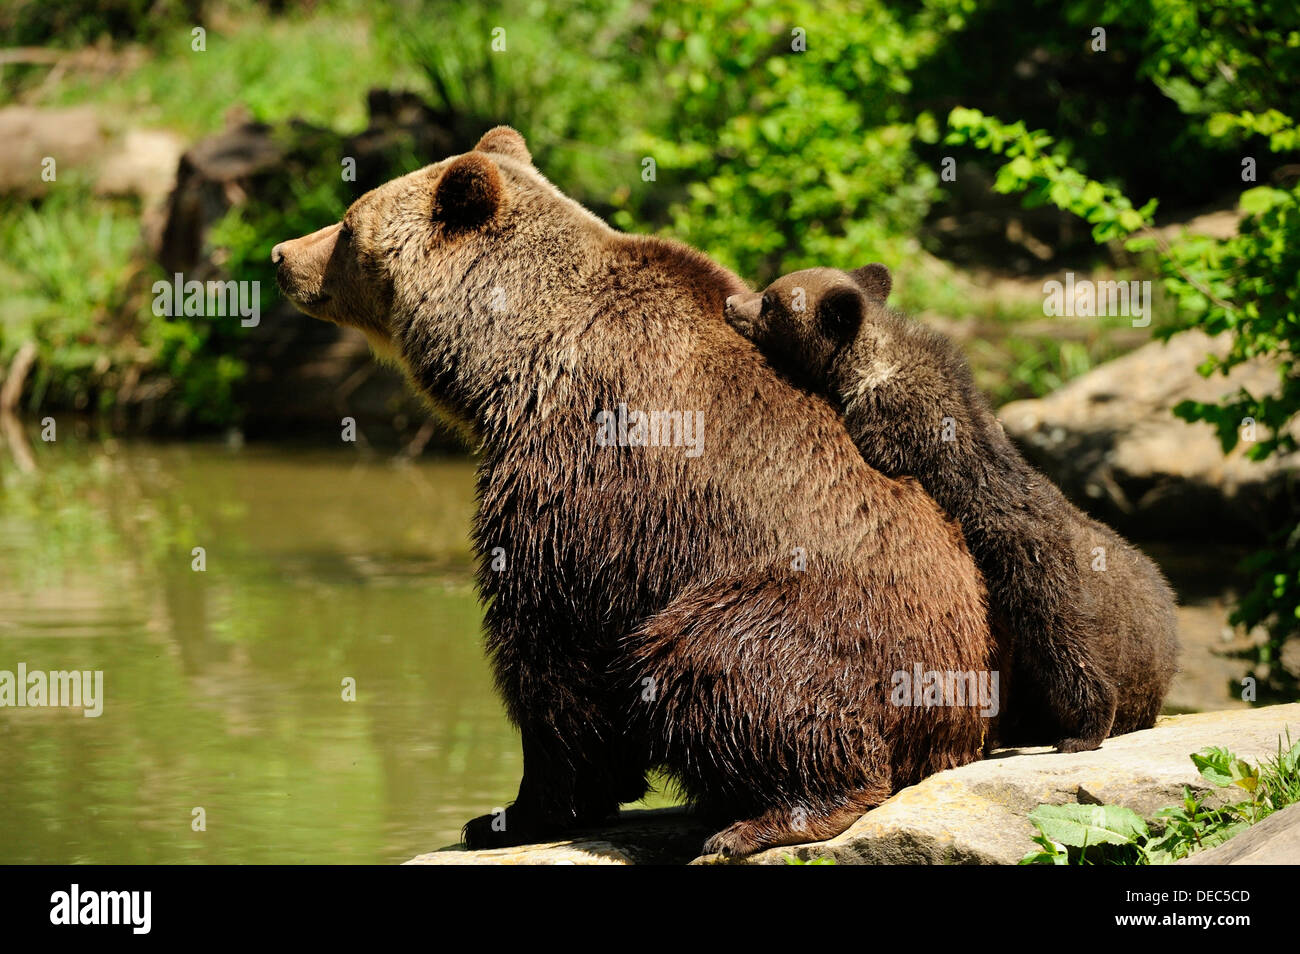 Brown Bears (Ursus arctos), cub, 4 months, trying to climb onto its mother's back, Adliswil, Canton of Zurich, Switzerland Stock Photo